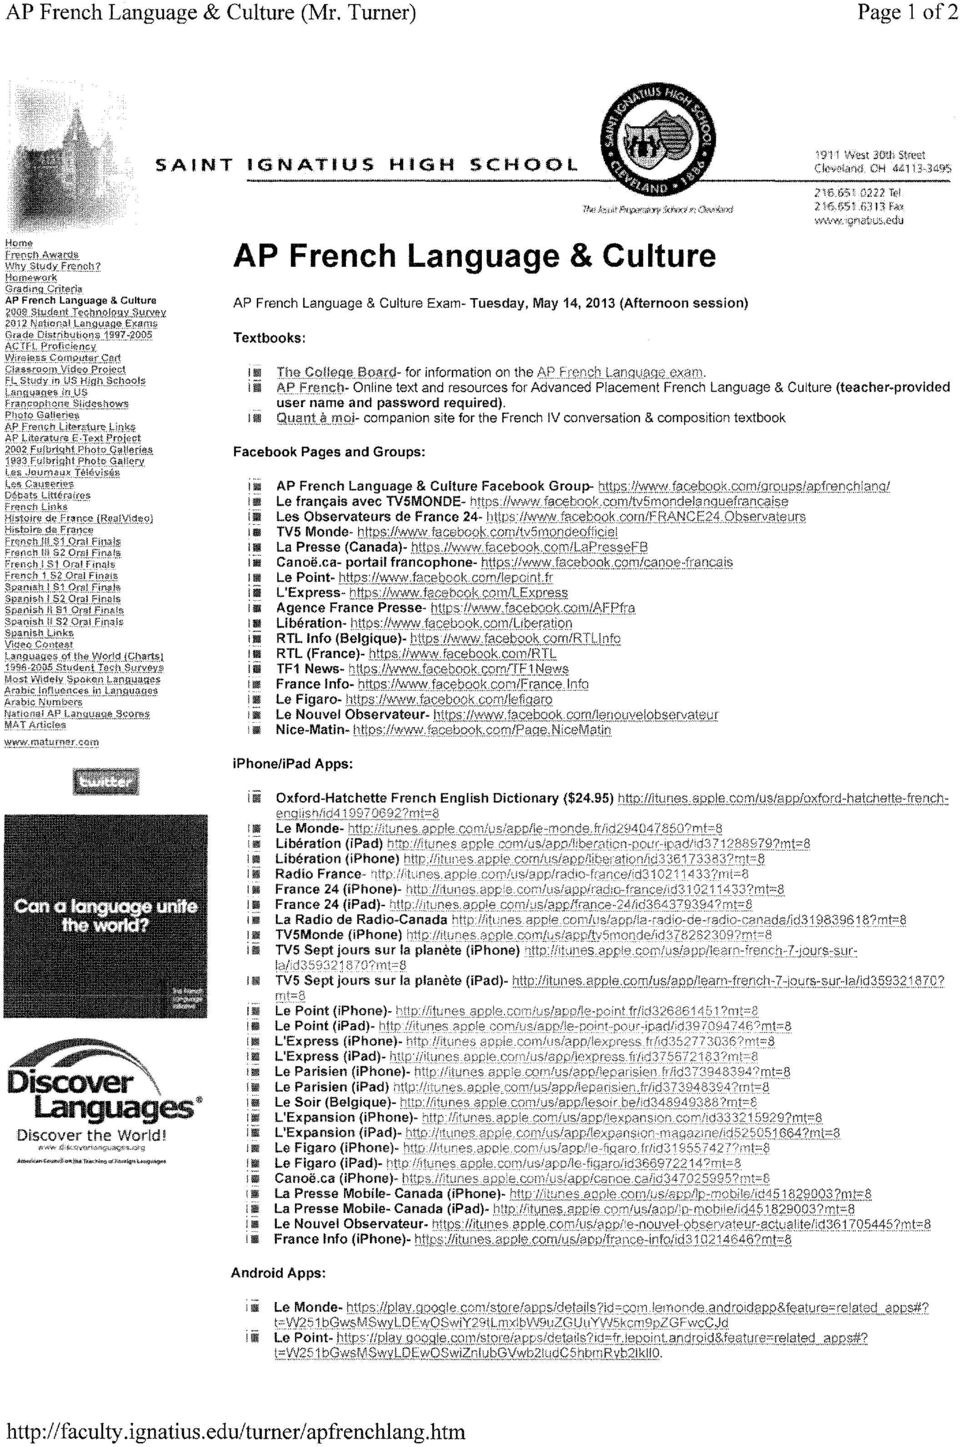 D9Uf\9?..f;l~?Jn. i i and resources for Advanced Placement French Language & Culture (teacher-provided user name and password required).!!!!! QM!'!